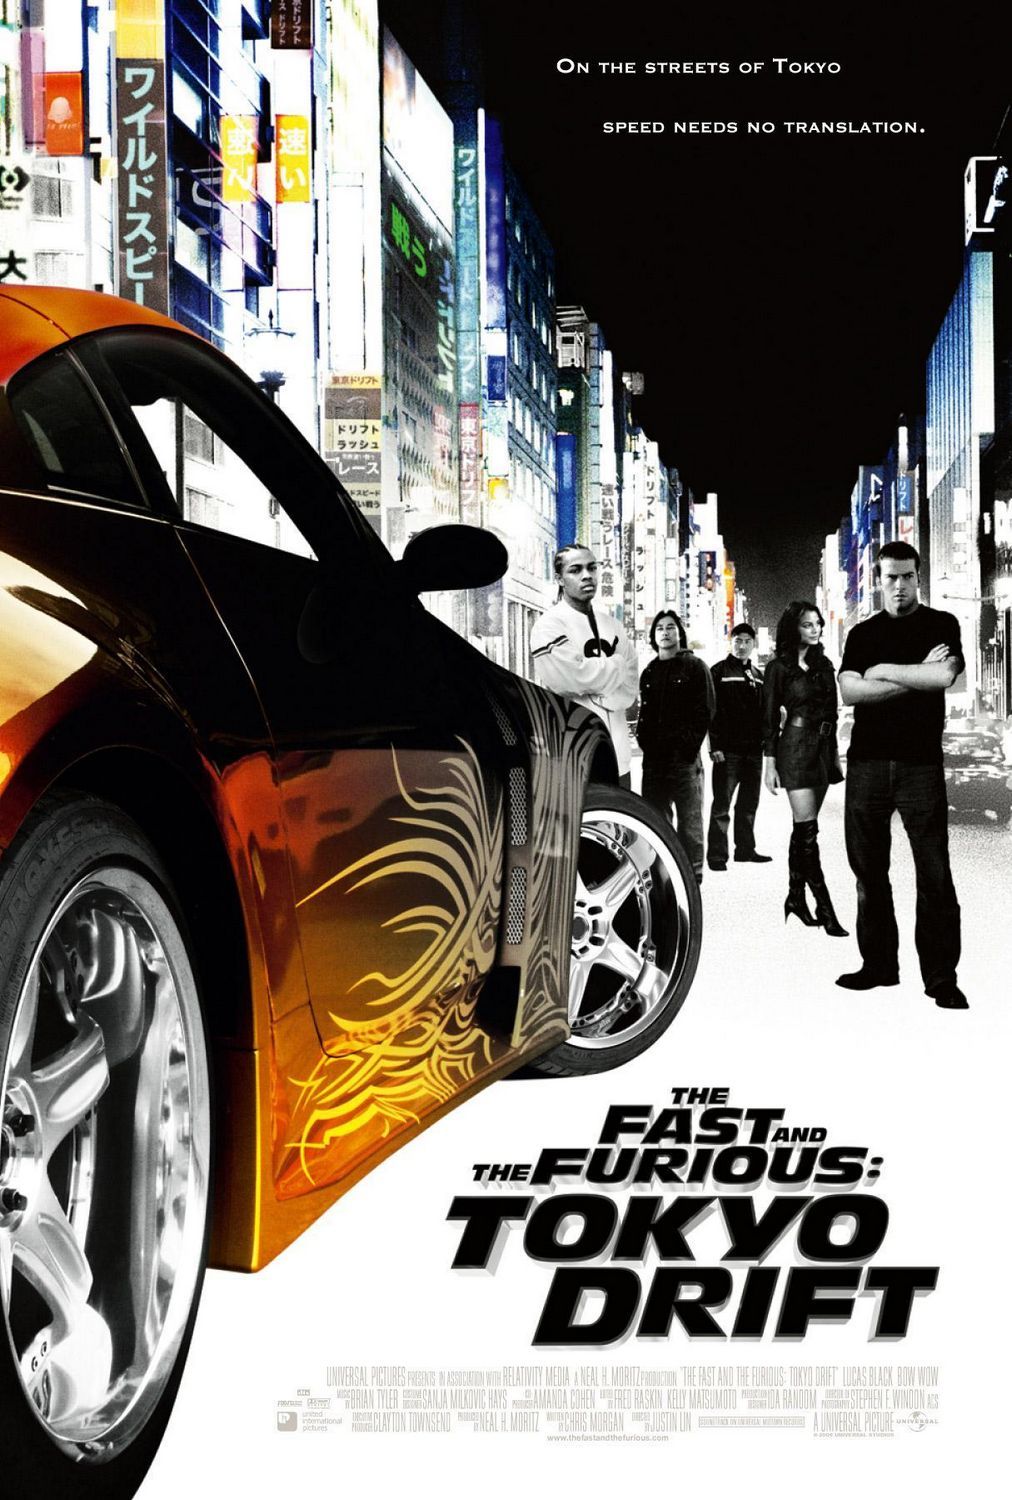 The Fast and the Furious: Tokyo Drift. The Fast and the Furious